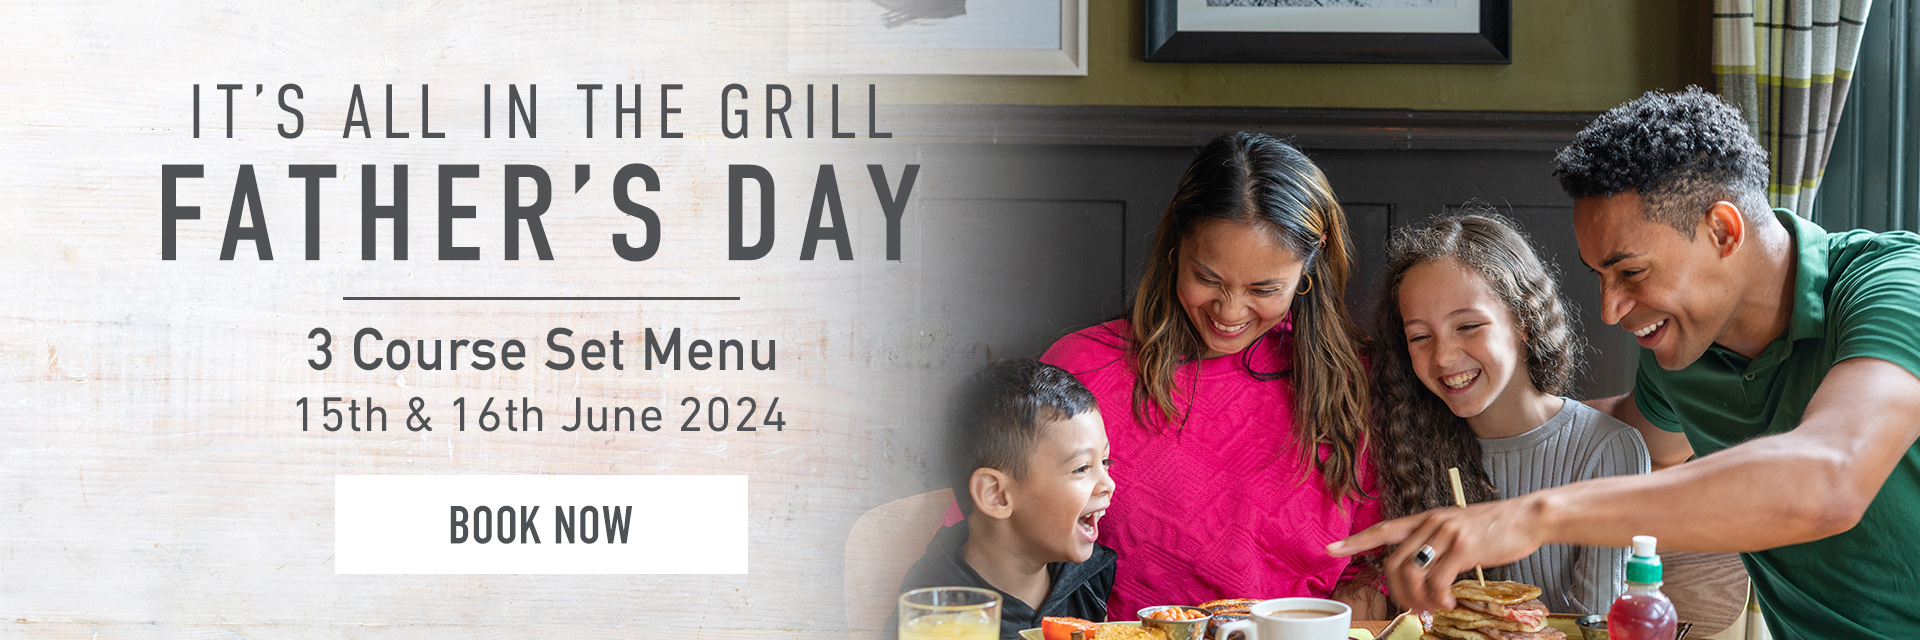 Father’s Day at Harvester Merthyr Tydfil